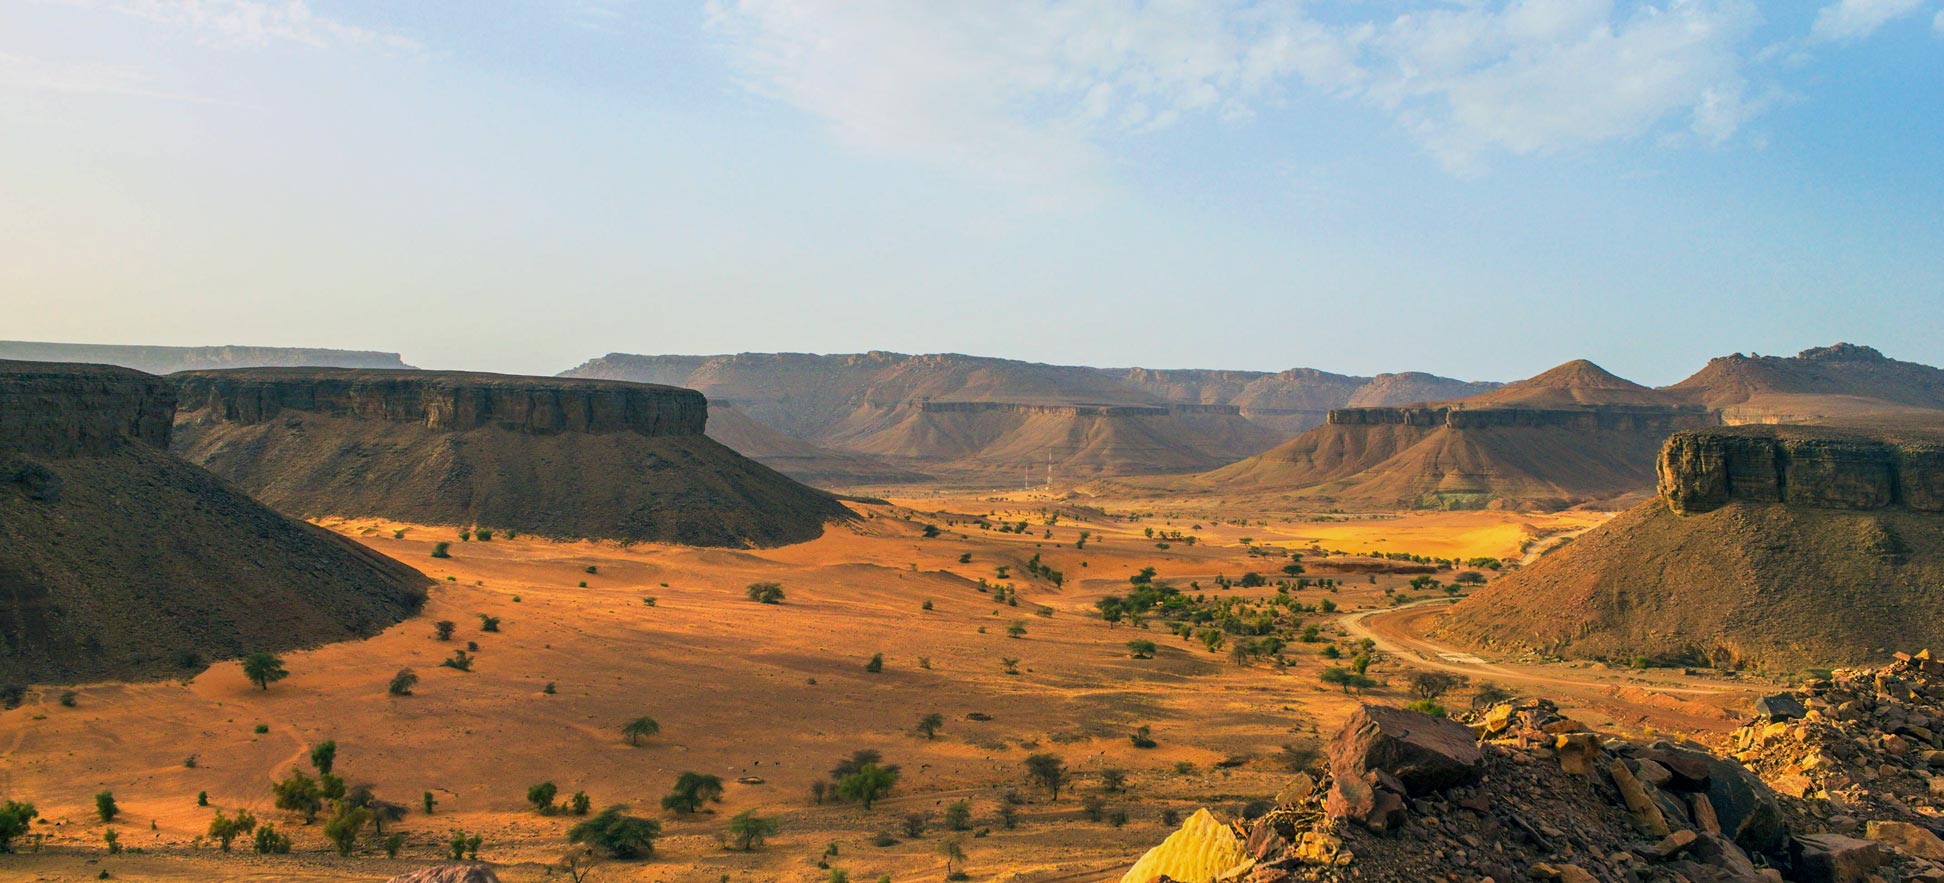 Landscape with Adrar Mountains